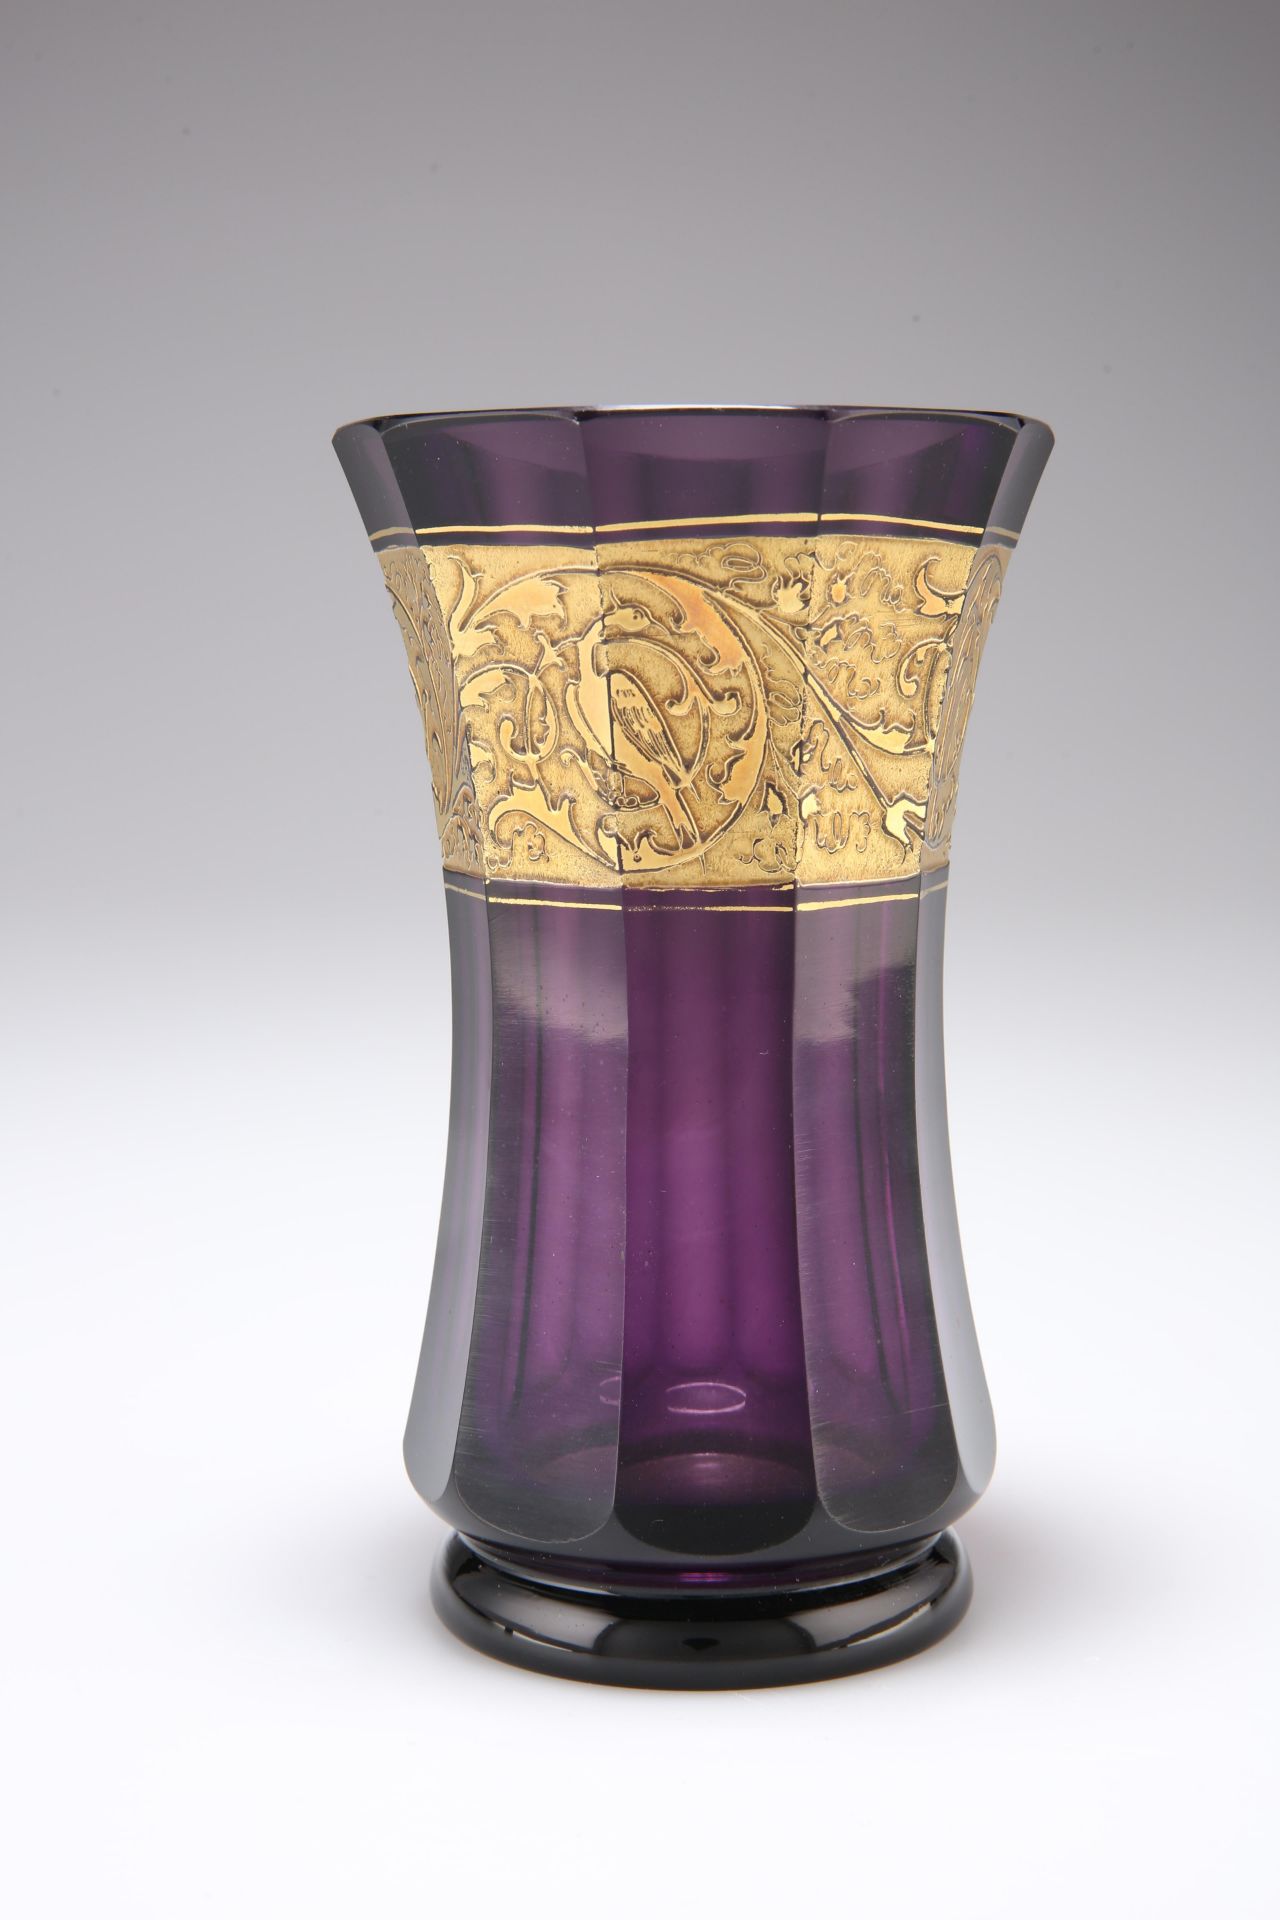 A MOSER AMTHEYST GLASS VASE, 1920'S, of faceted waisted form, with gilt oroplastic birds and foliage